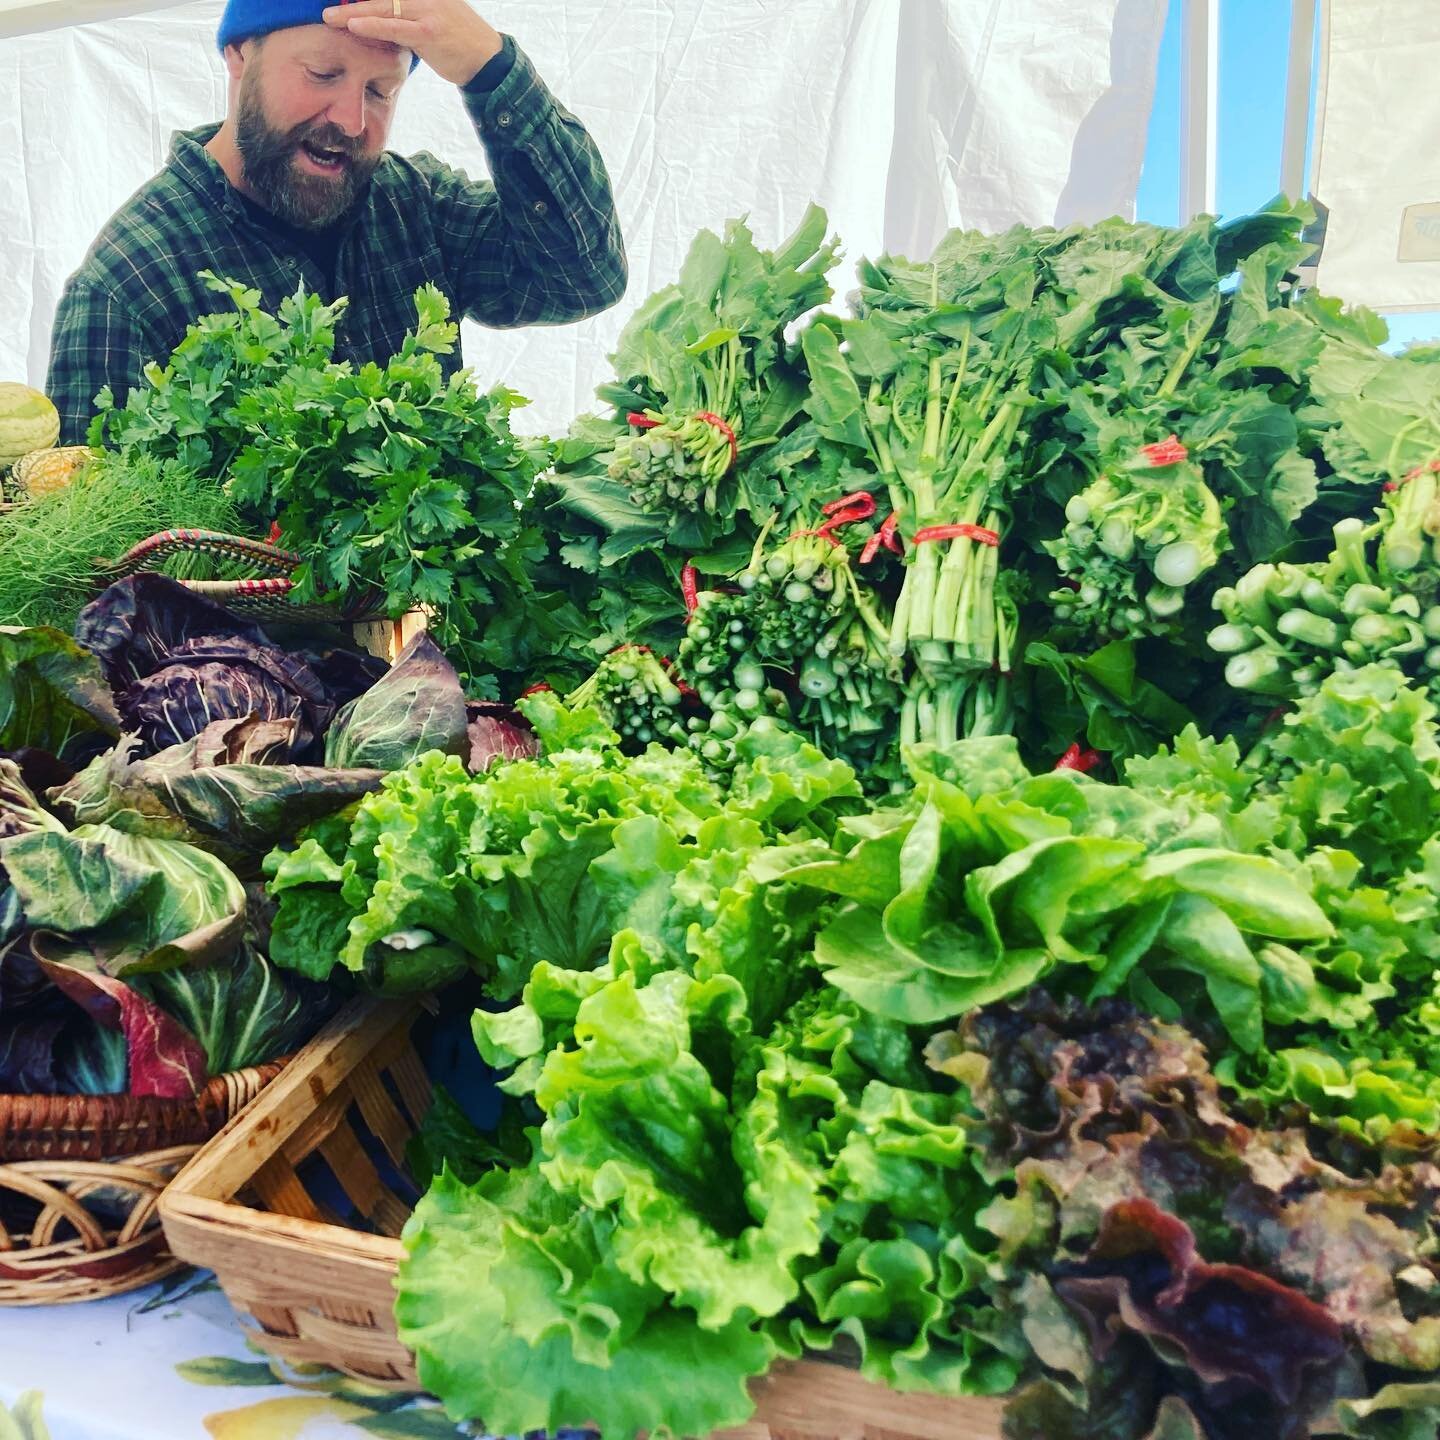 Dang! How you grow those beauties under all them blankets Farmer Nat?! All this and more are available right now on #piccalillifarm2porch along with all the #locallygrown and #locallymade products you can find on our website (link in bio) every Tuesd